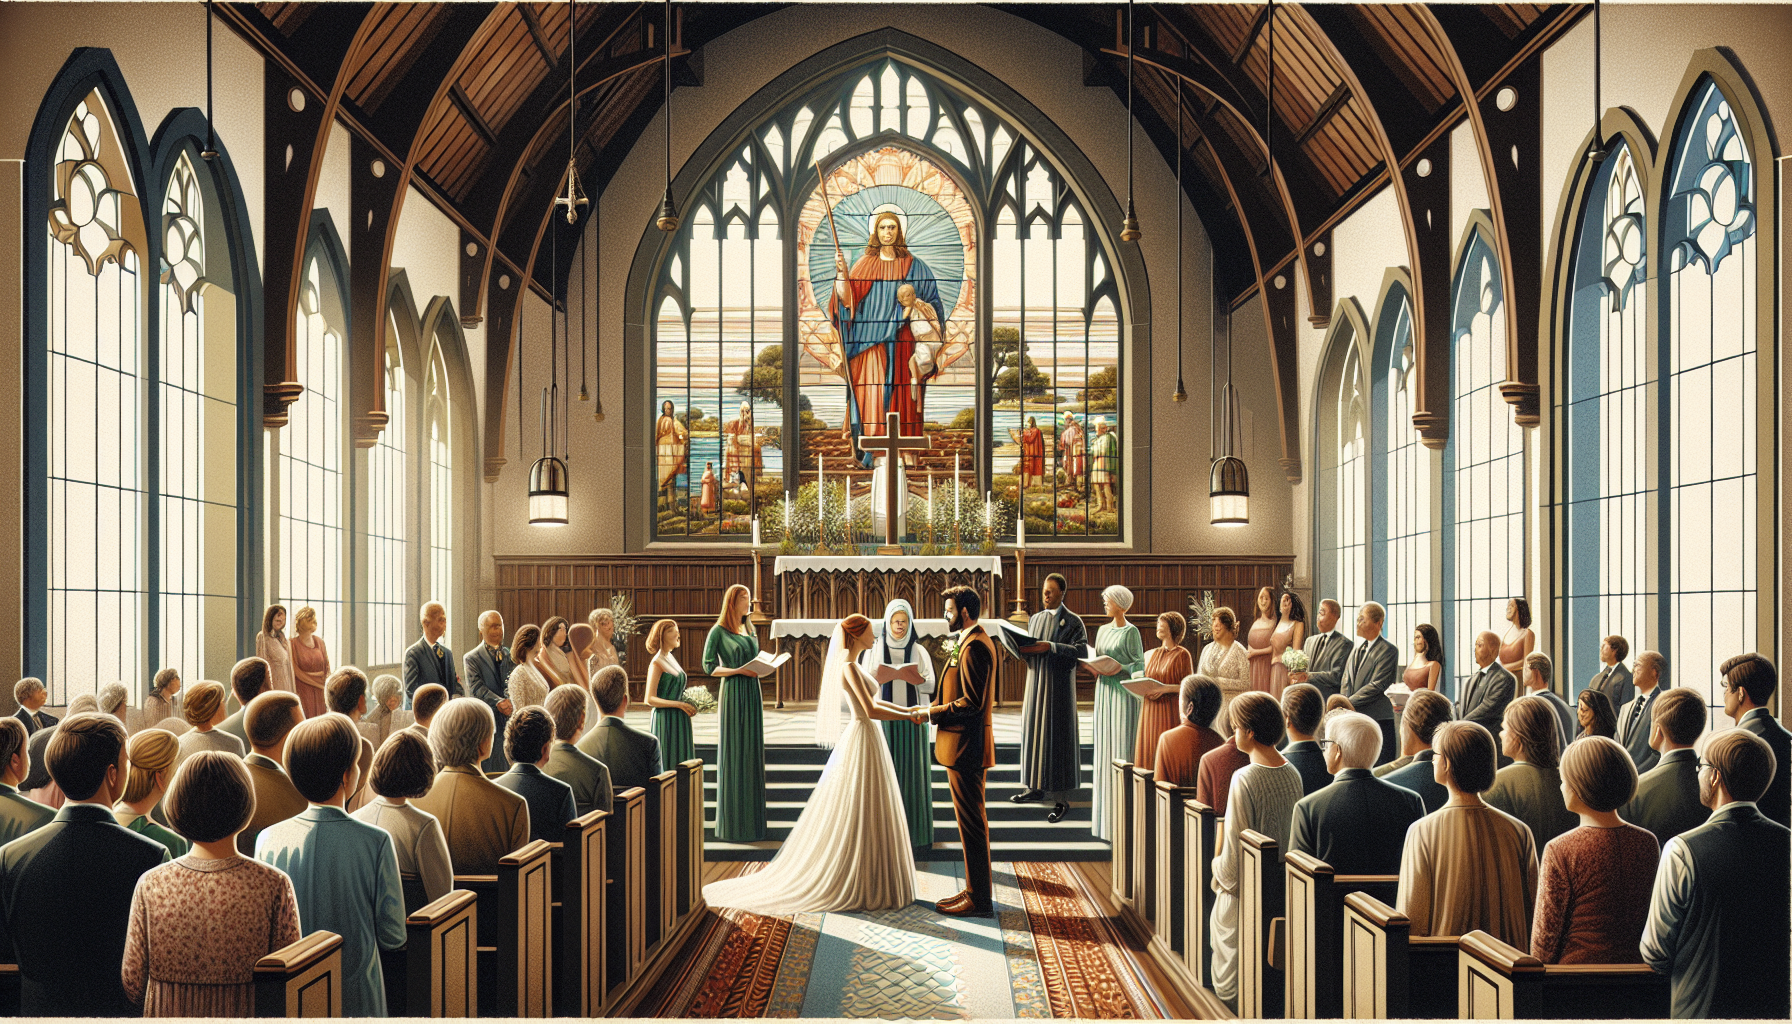 A beautifully illustrated scene depicting a Christian wedding ceremony taking place in a charming, old-fashioned church. The scene includes a loving couple standing at the altar, exchanging vows with